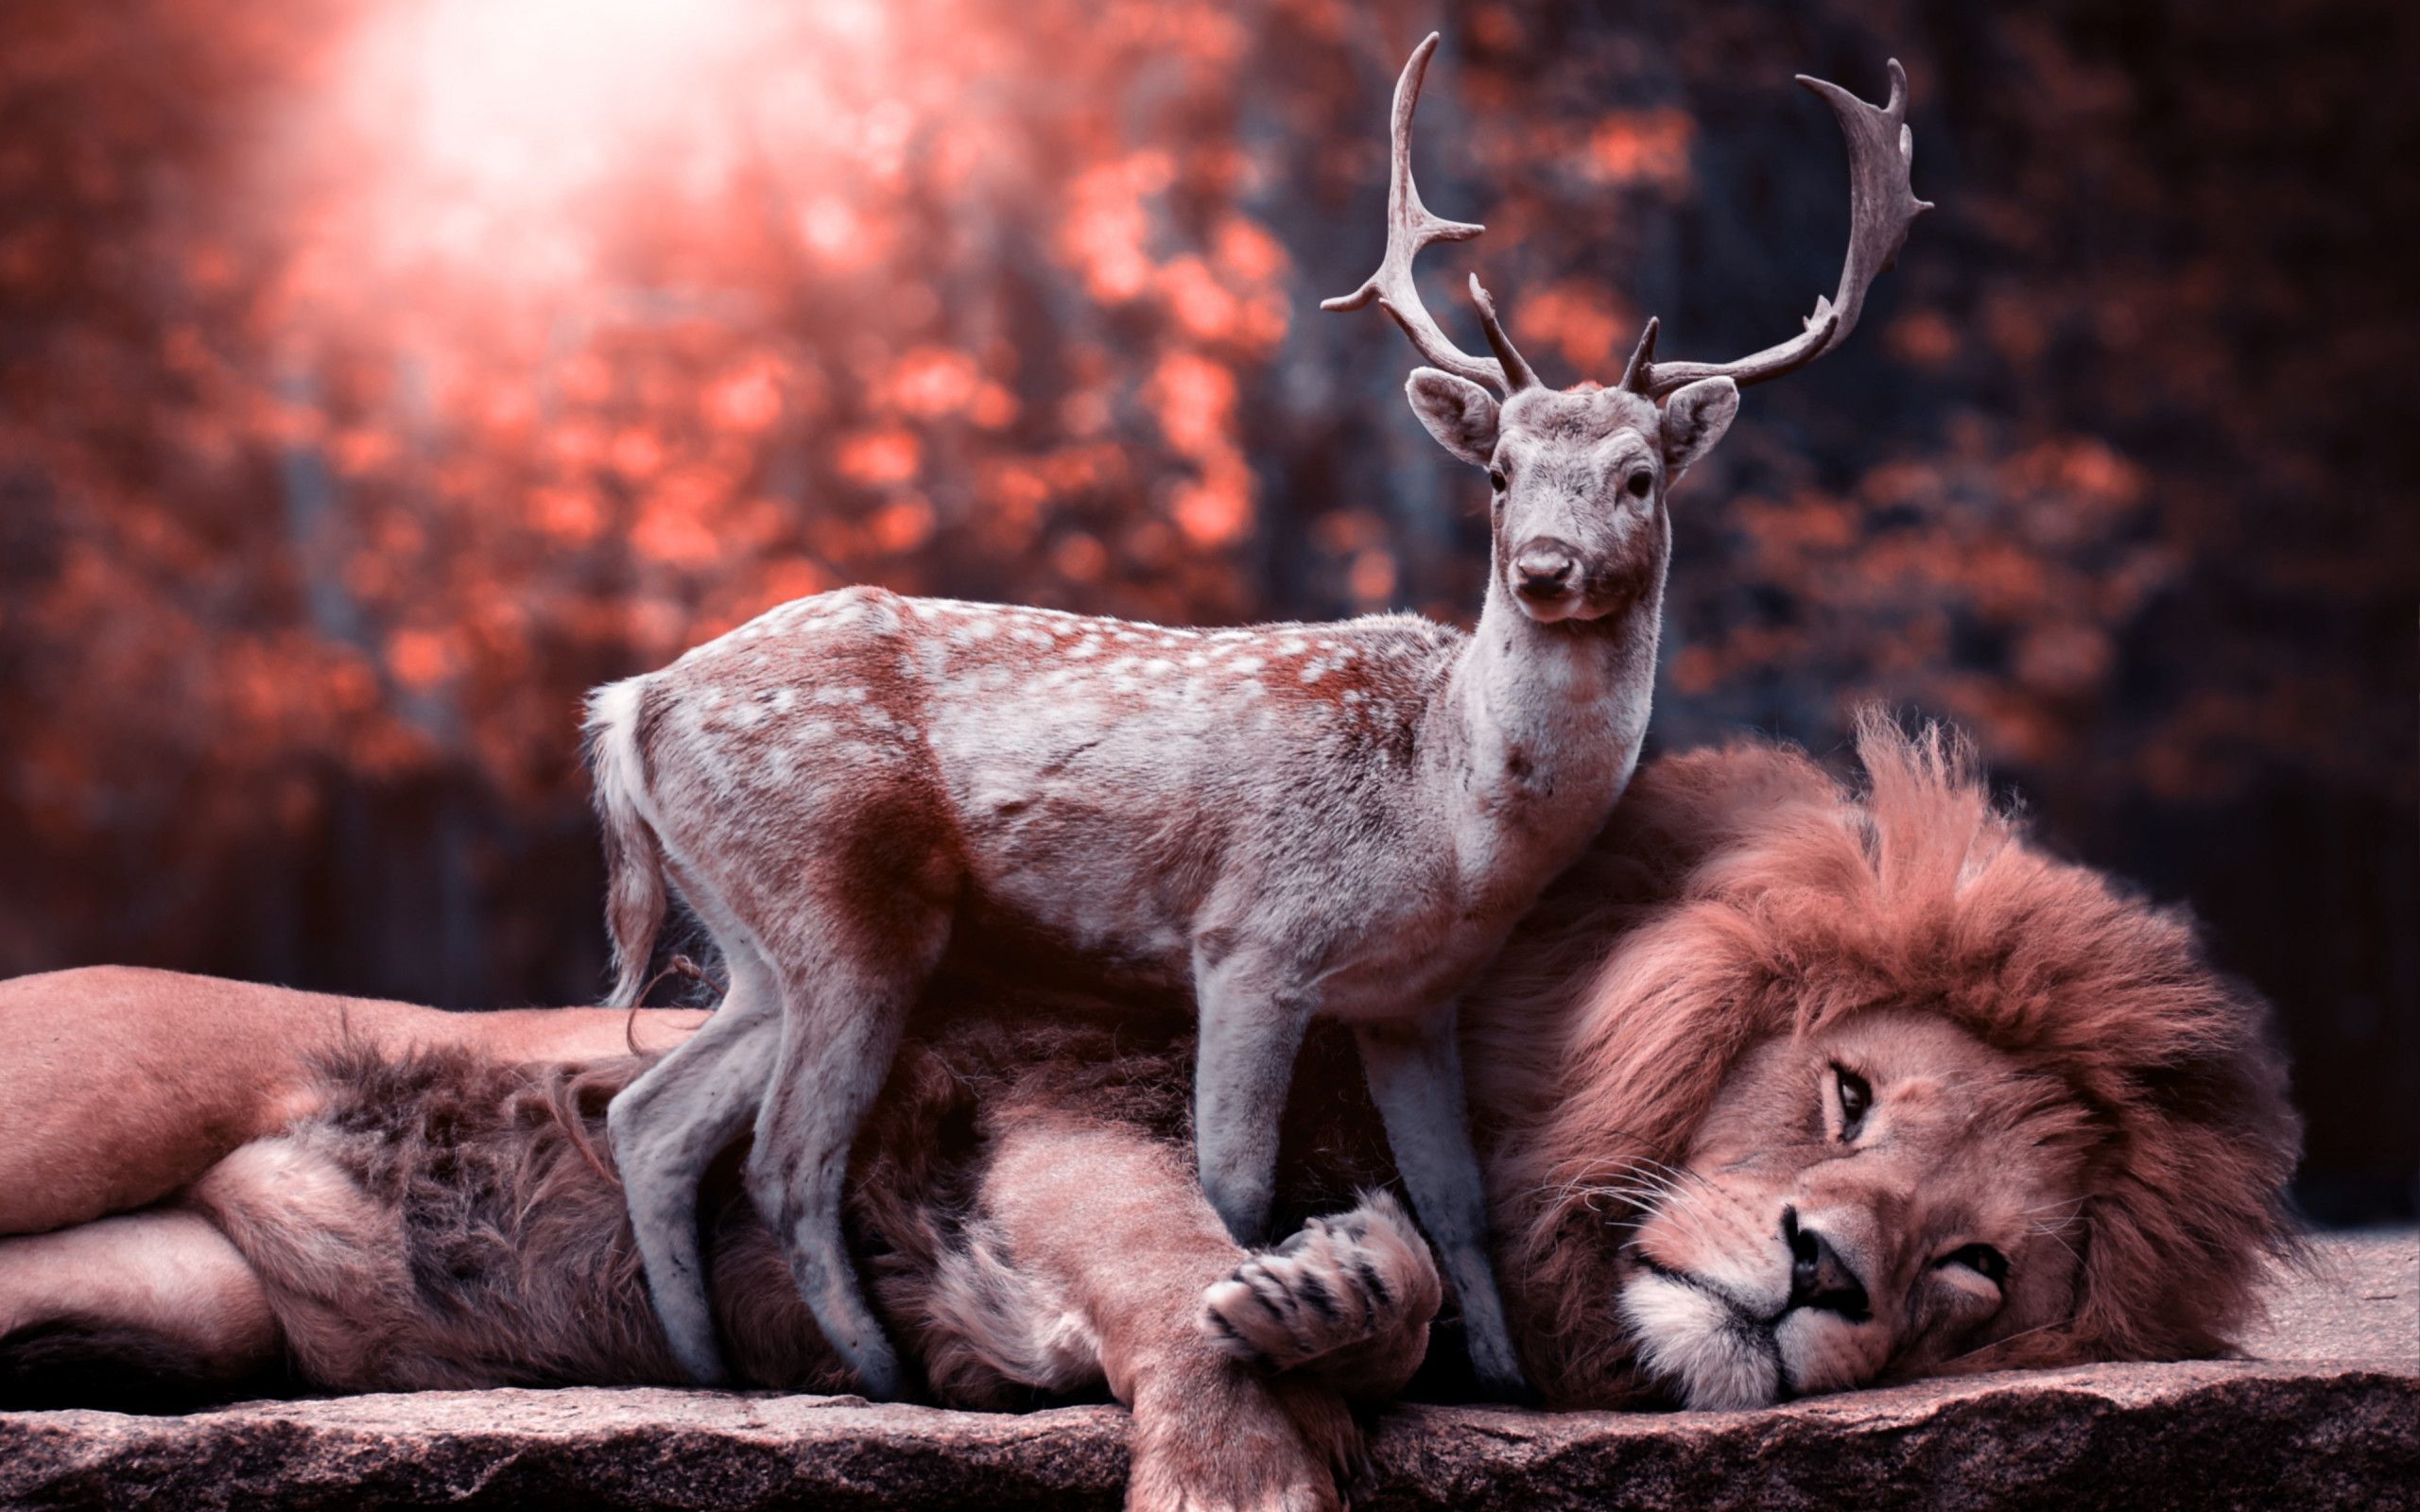 The lion and the deer wallpaper 2560x1600